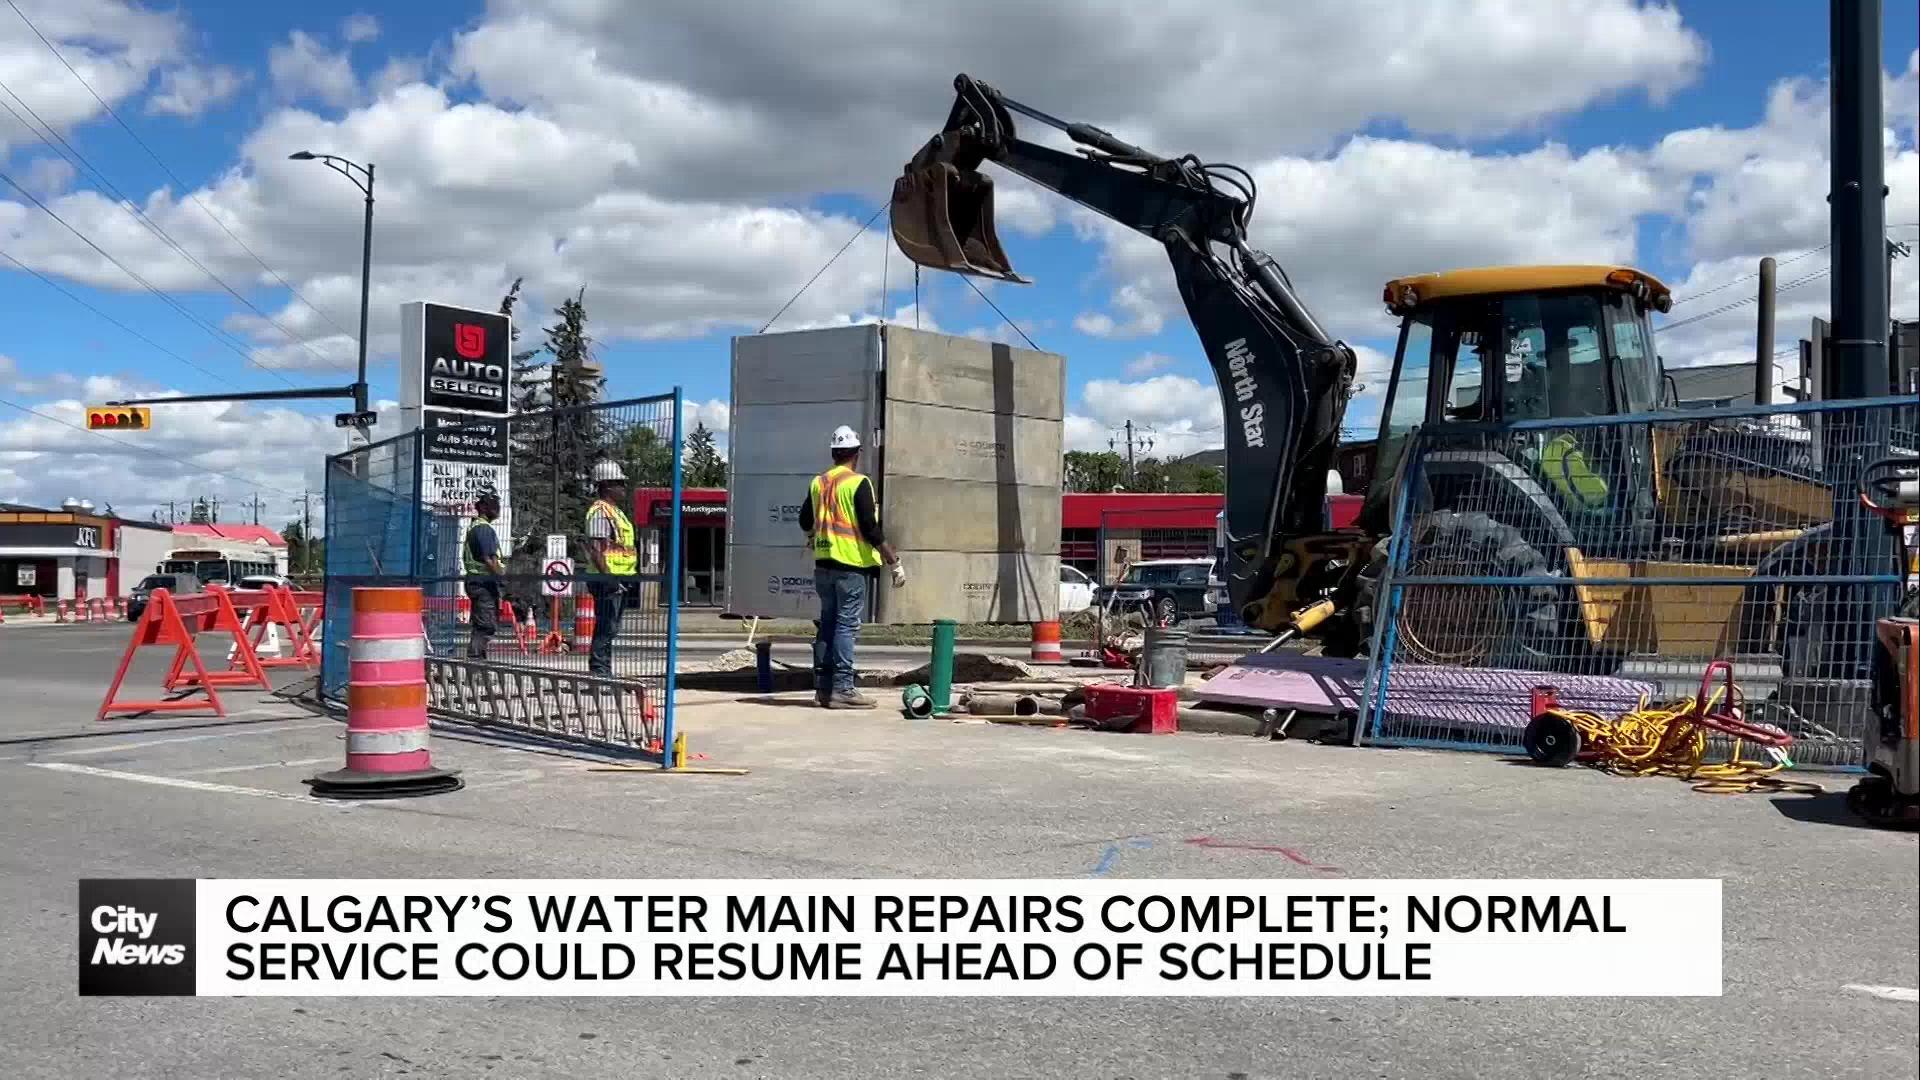 Calgary water main repairs complete, normal service could be restored ahead of schedule